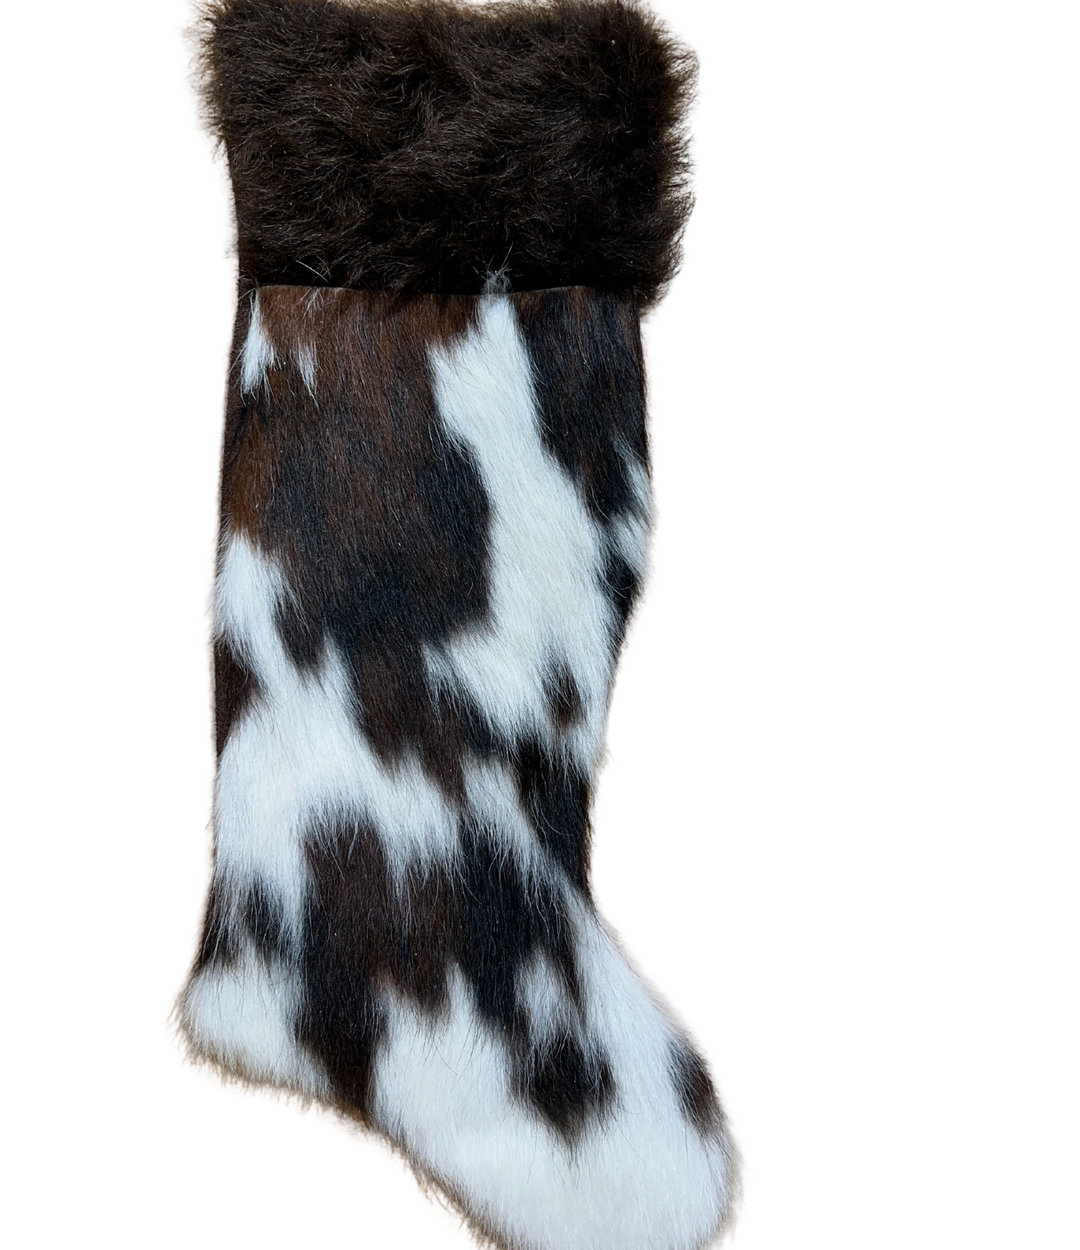 Tricolor - Cowhide Christmas Stocking with Bison Hair - Large